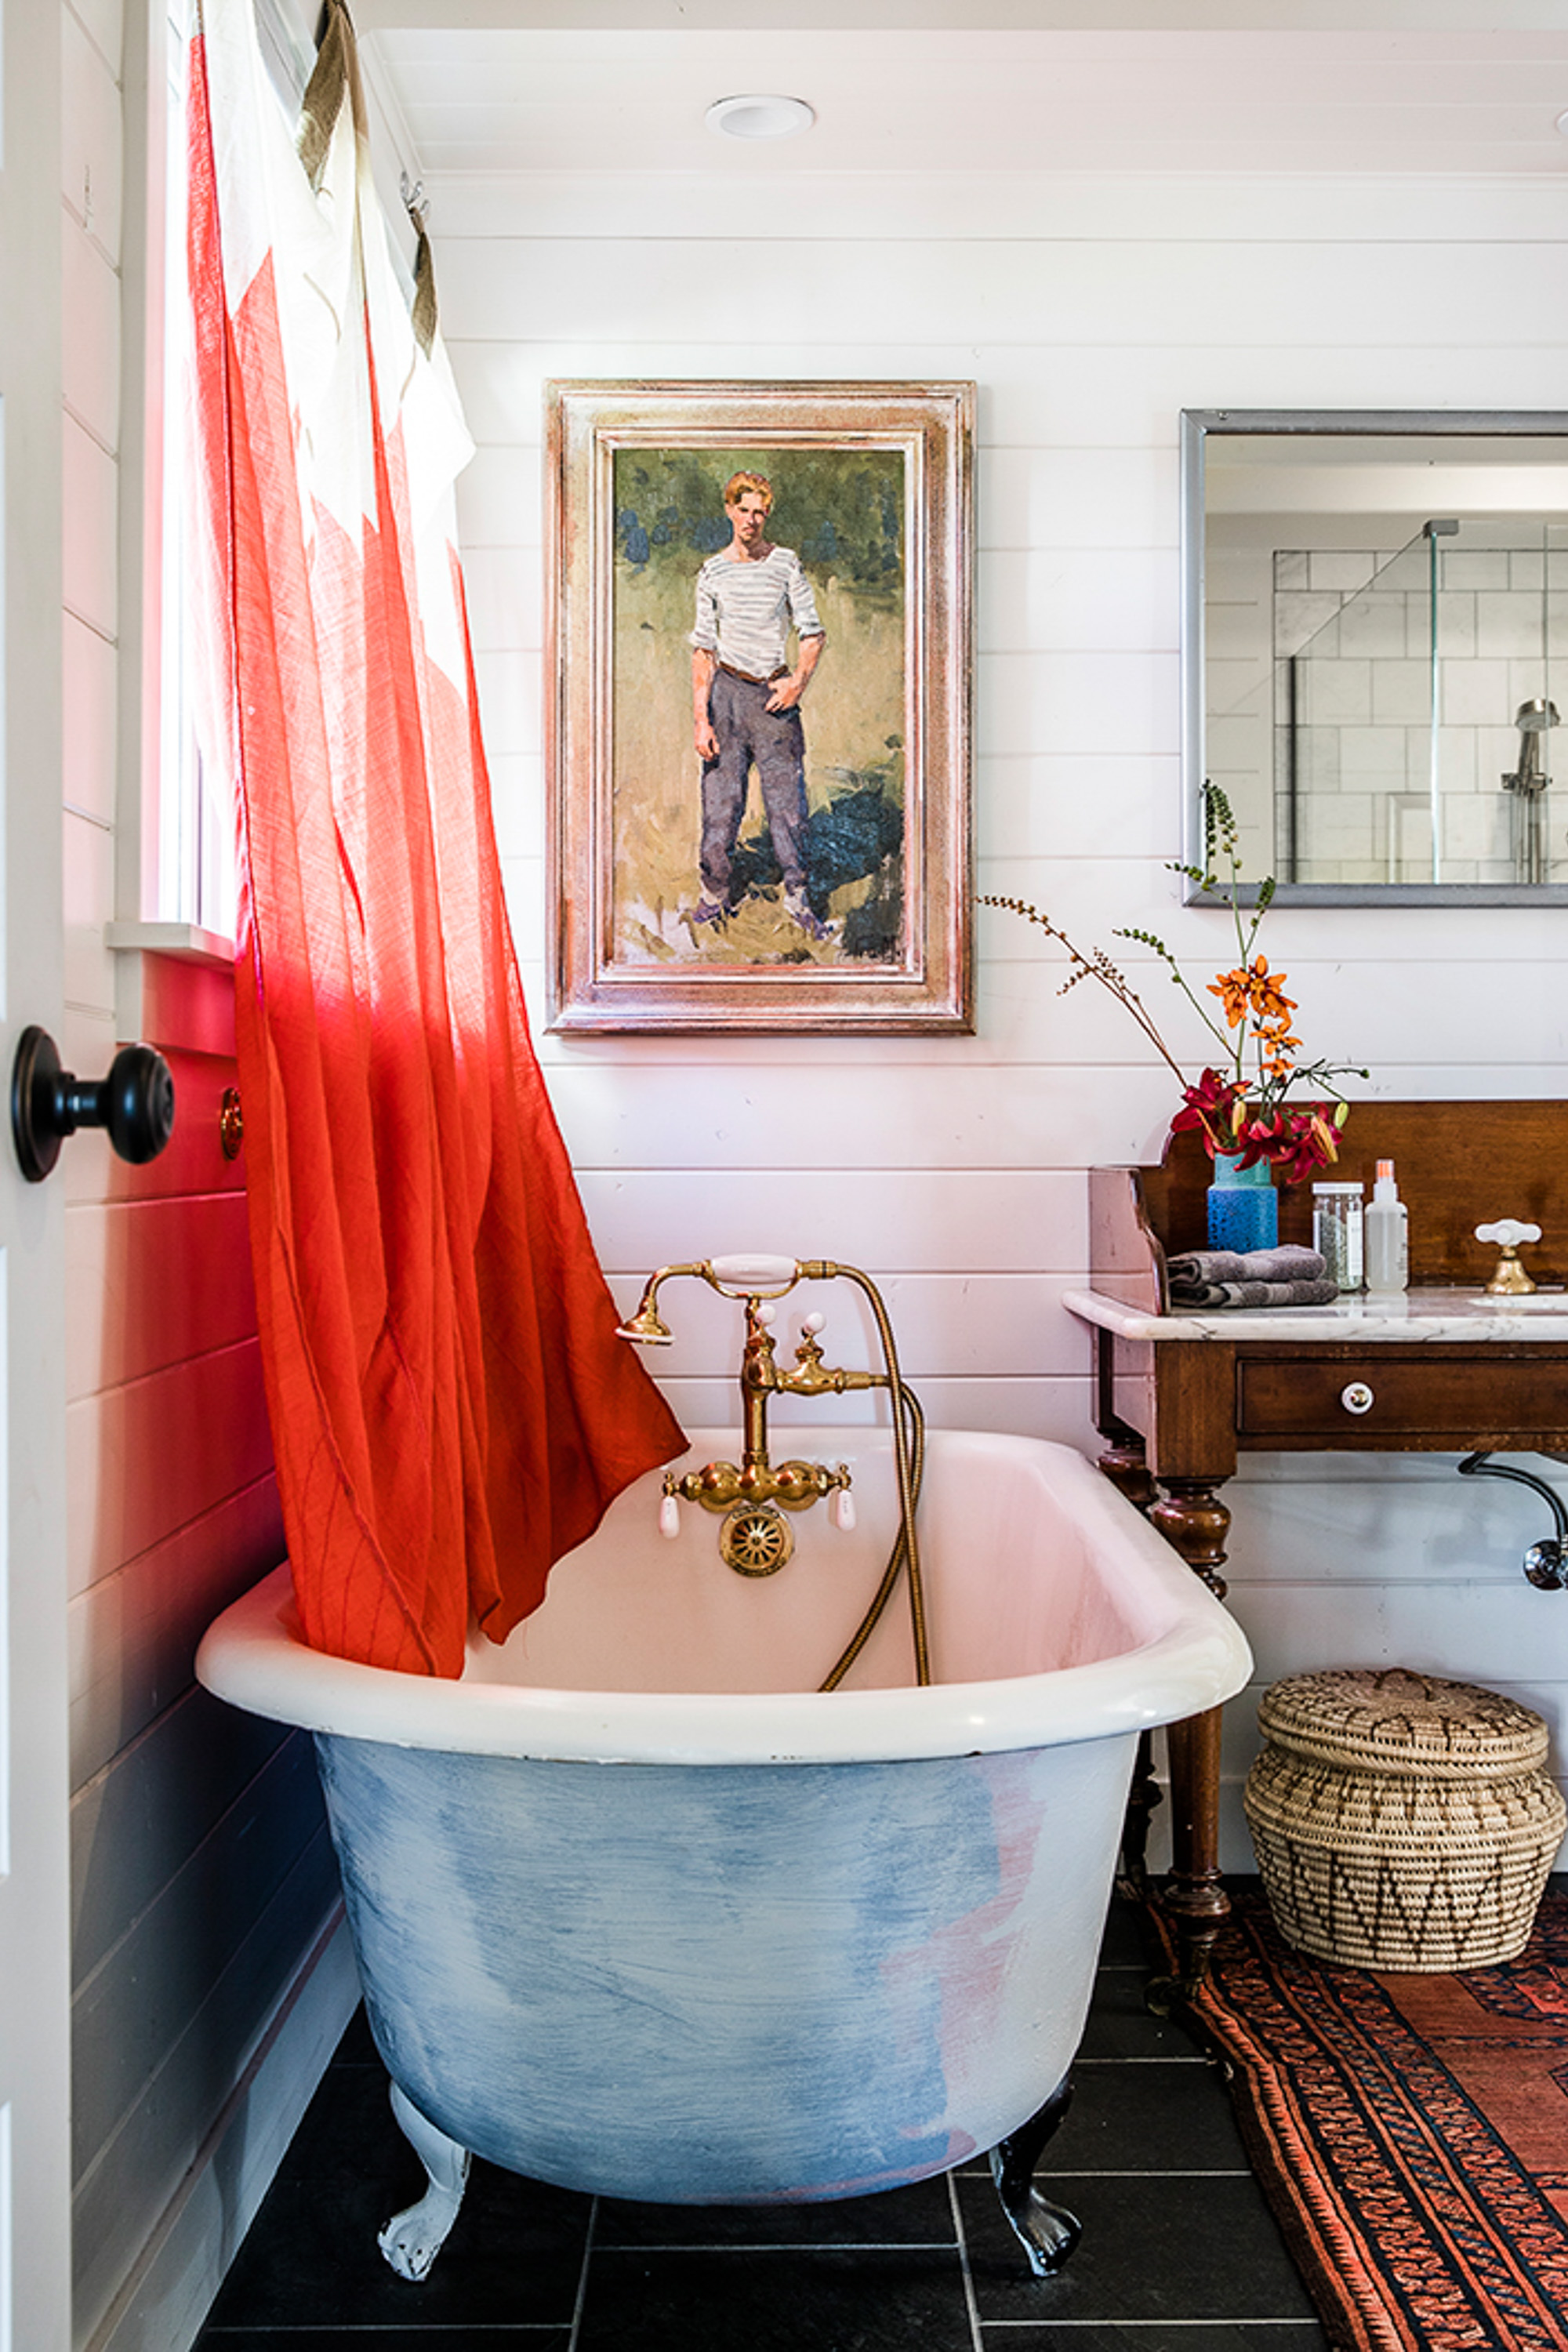 a circa-1920s soaking tub, sourced from Second Use in Seattle paired with signal flags found in Provincetown serves as drapery, adding a nautical touch.